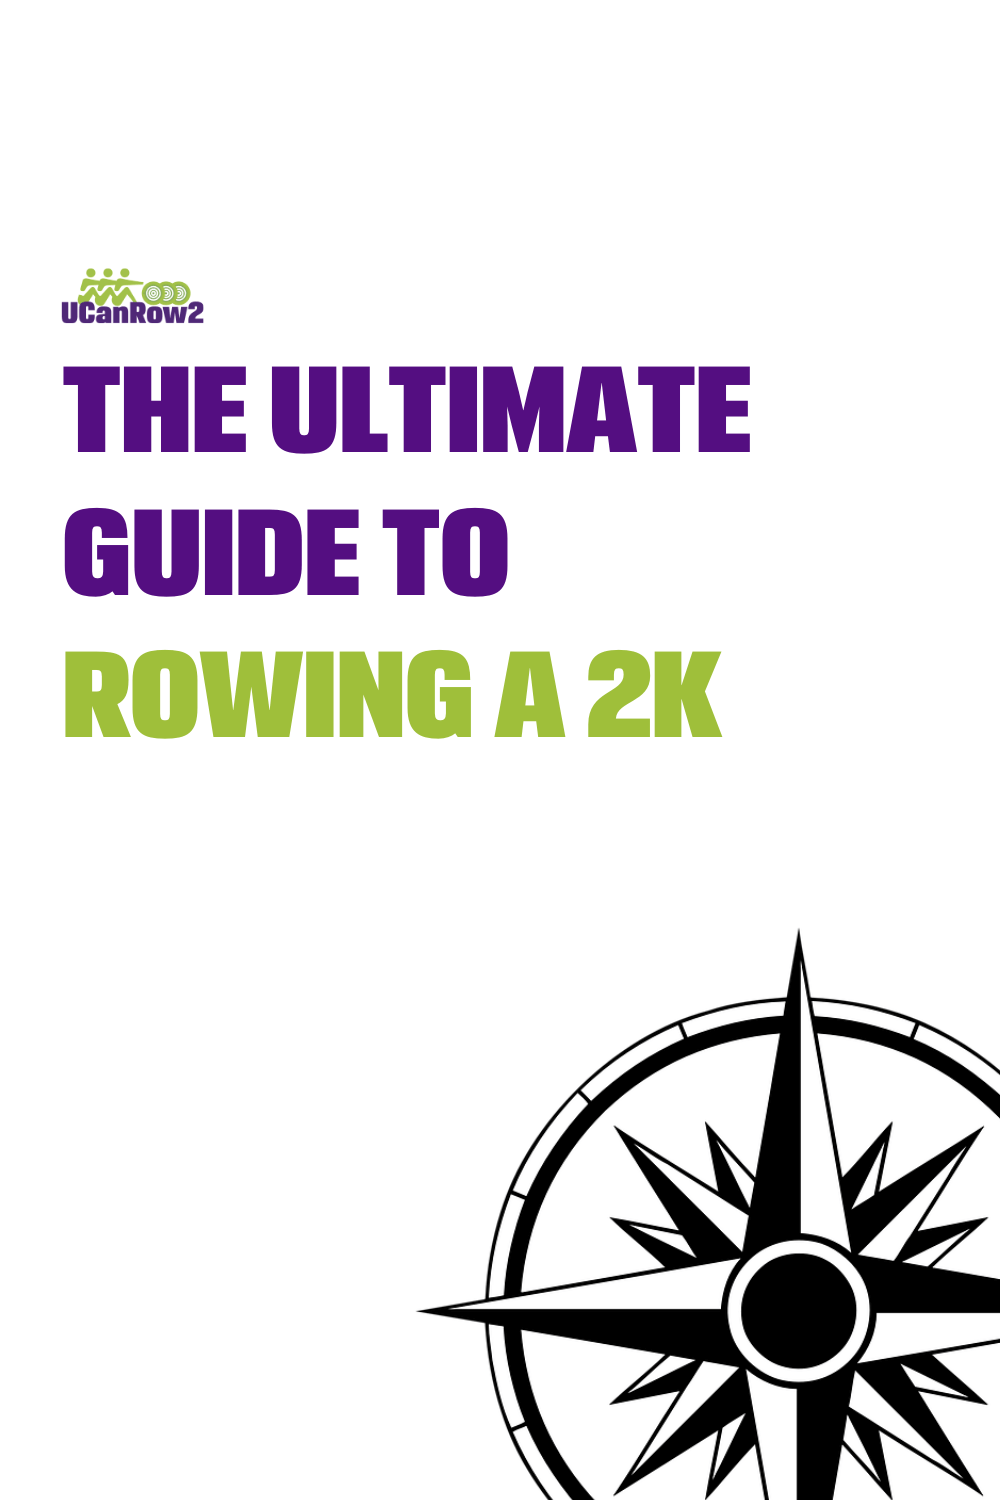 The Ultimate Guide to Rowing a 2k